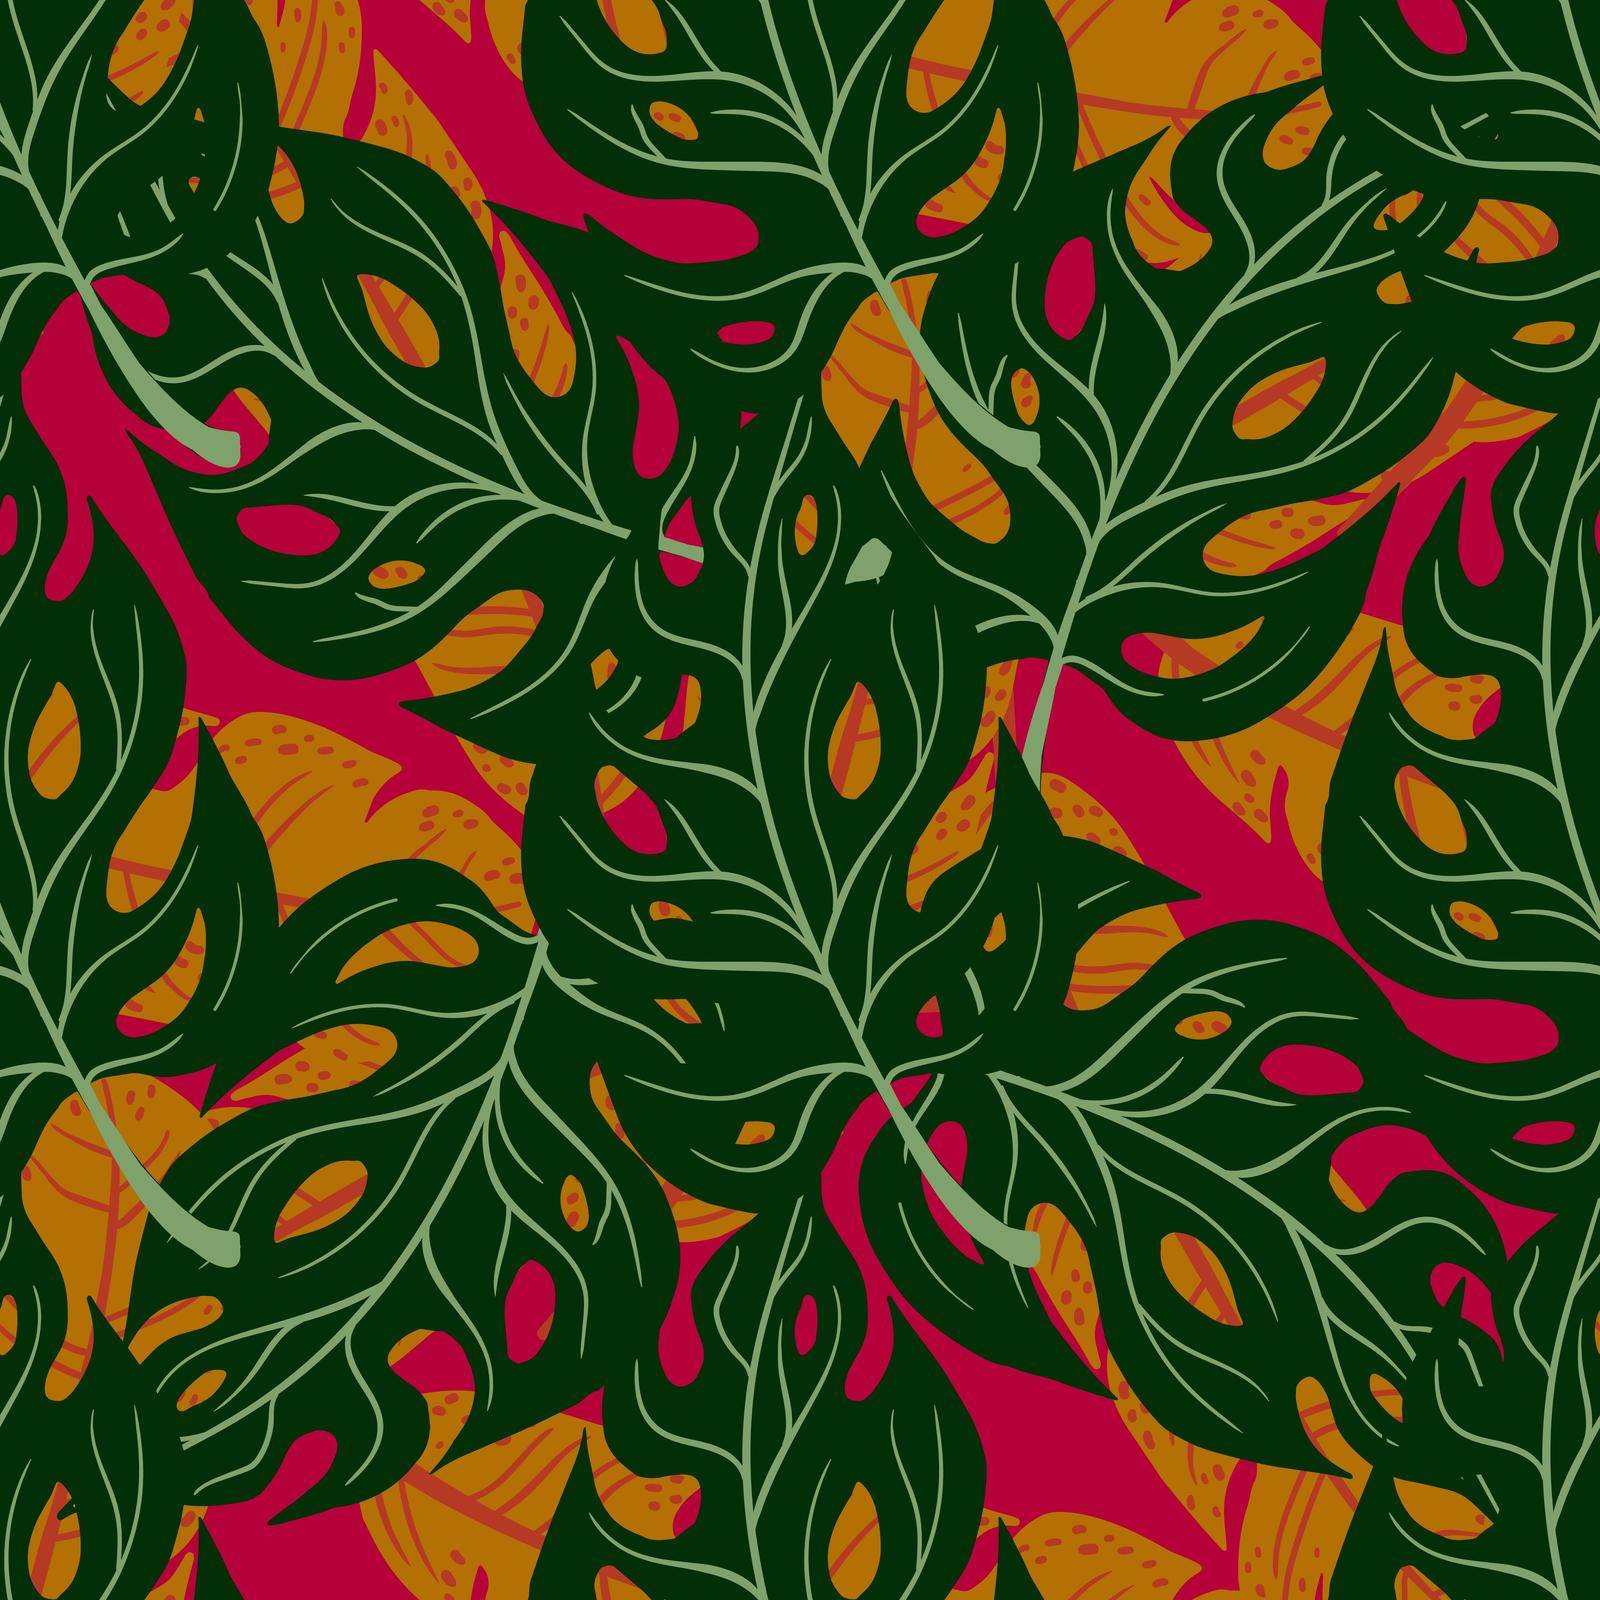 Tropical Leaves Hand drawn Vector Textile Seamless Pattern Design. Vector illustration